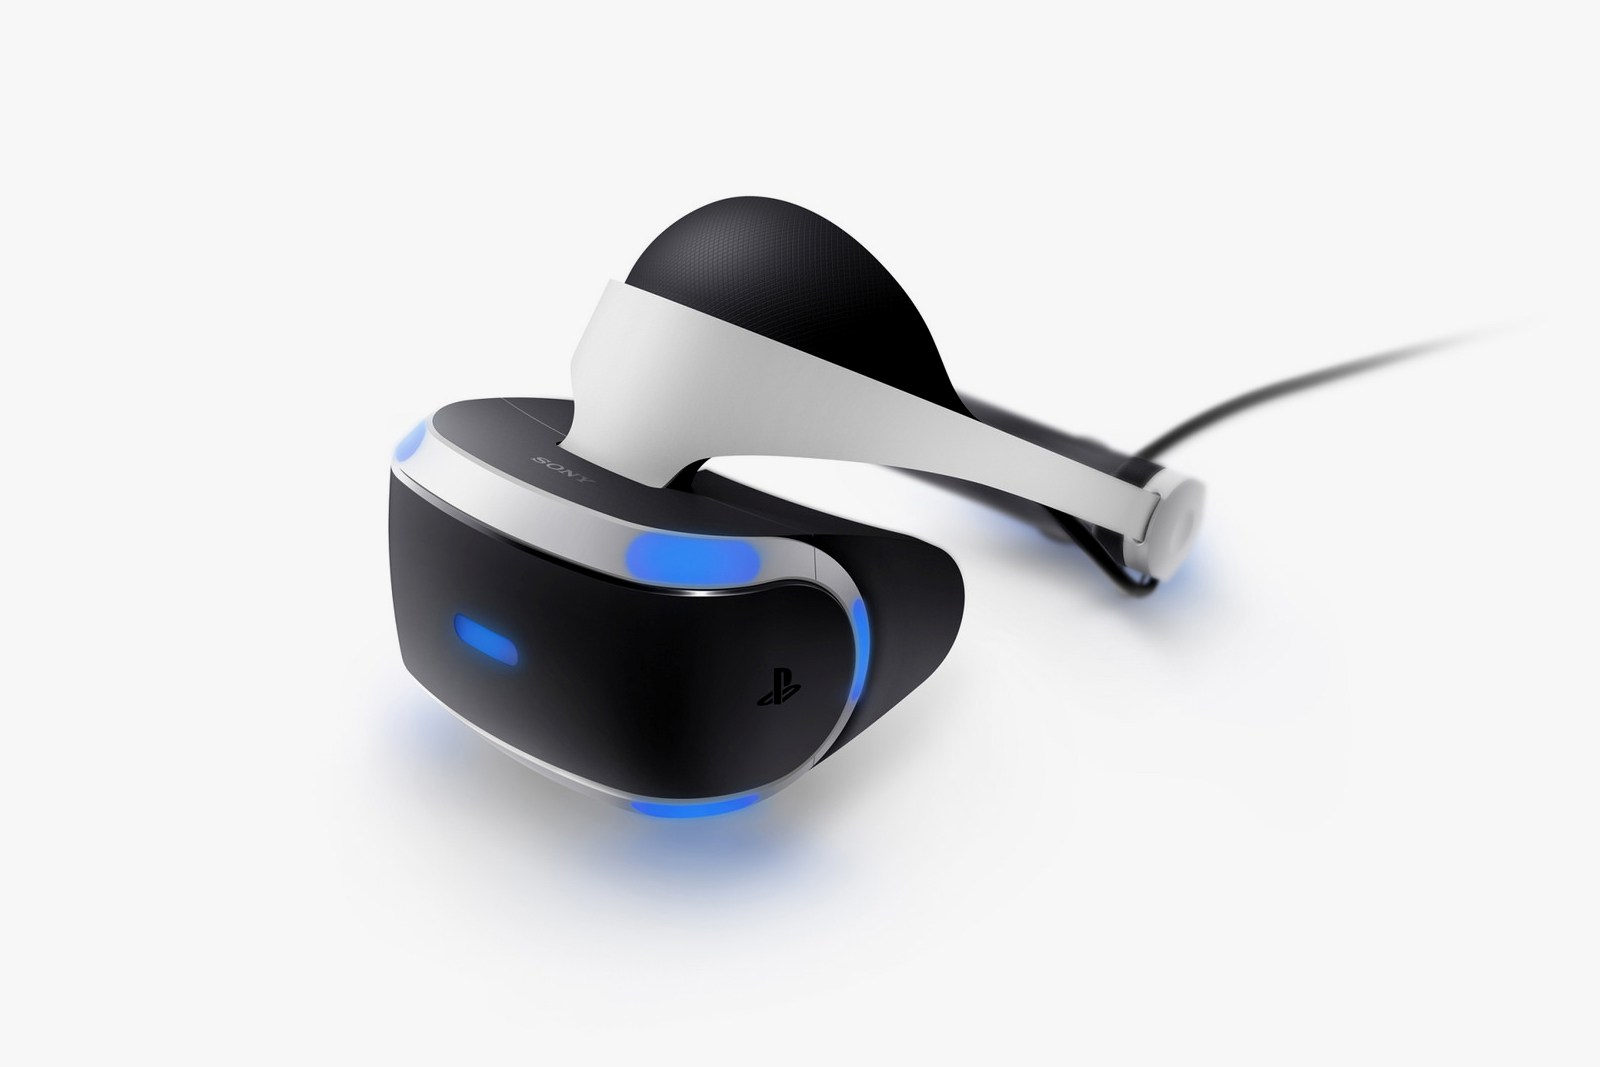 playstation-vr-is-coming-this-fall-for-399-1